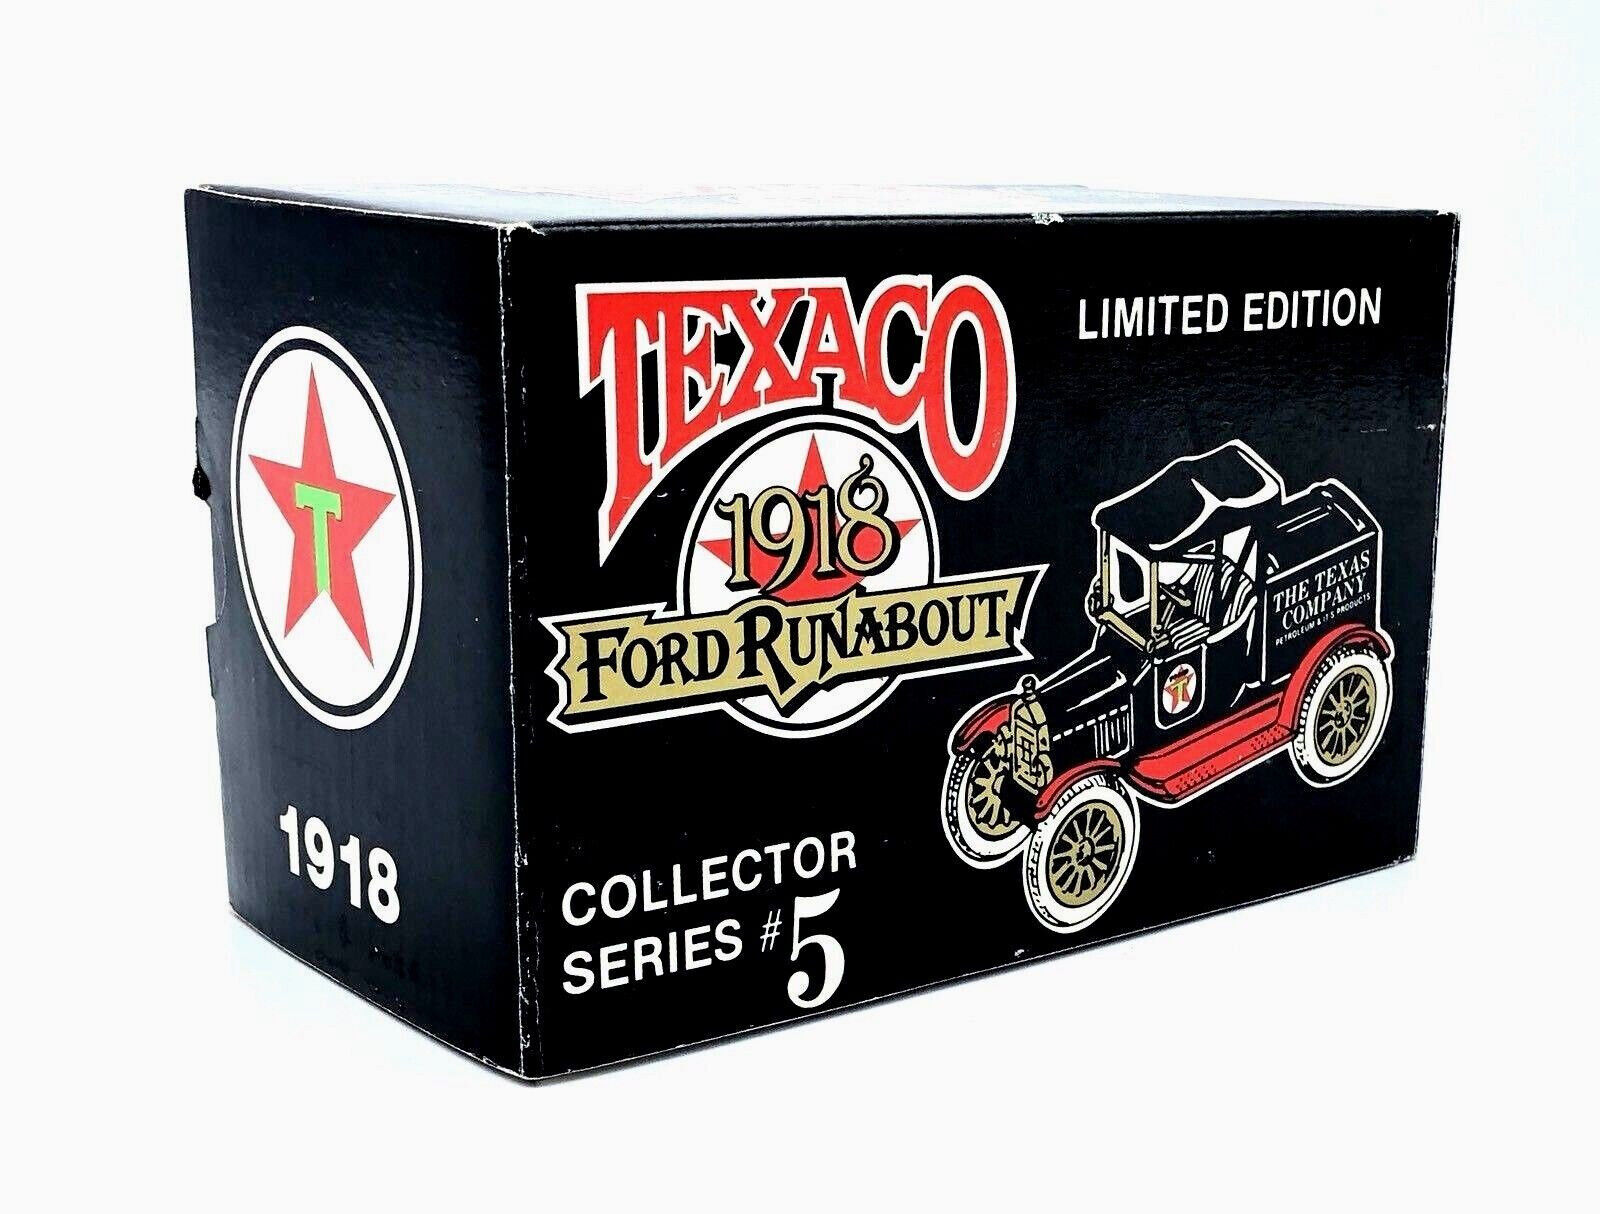 ERTL Texaco 1918 Ford Runabout Collector Series #5 Die Cast 1988